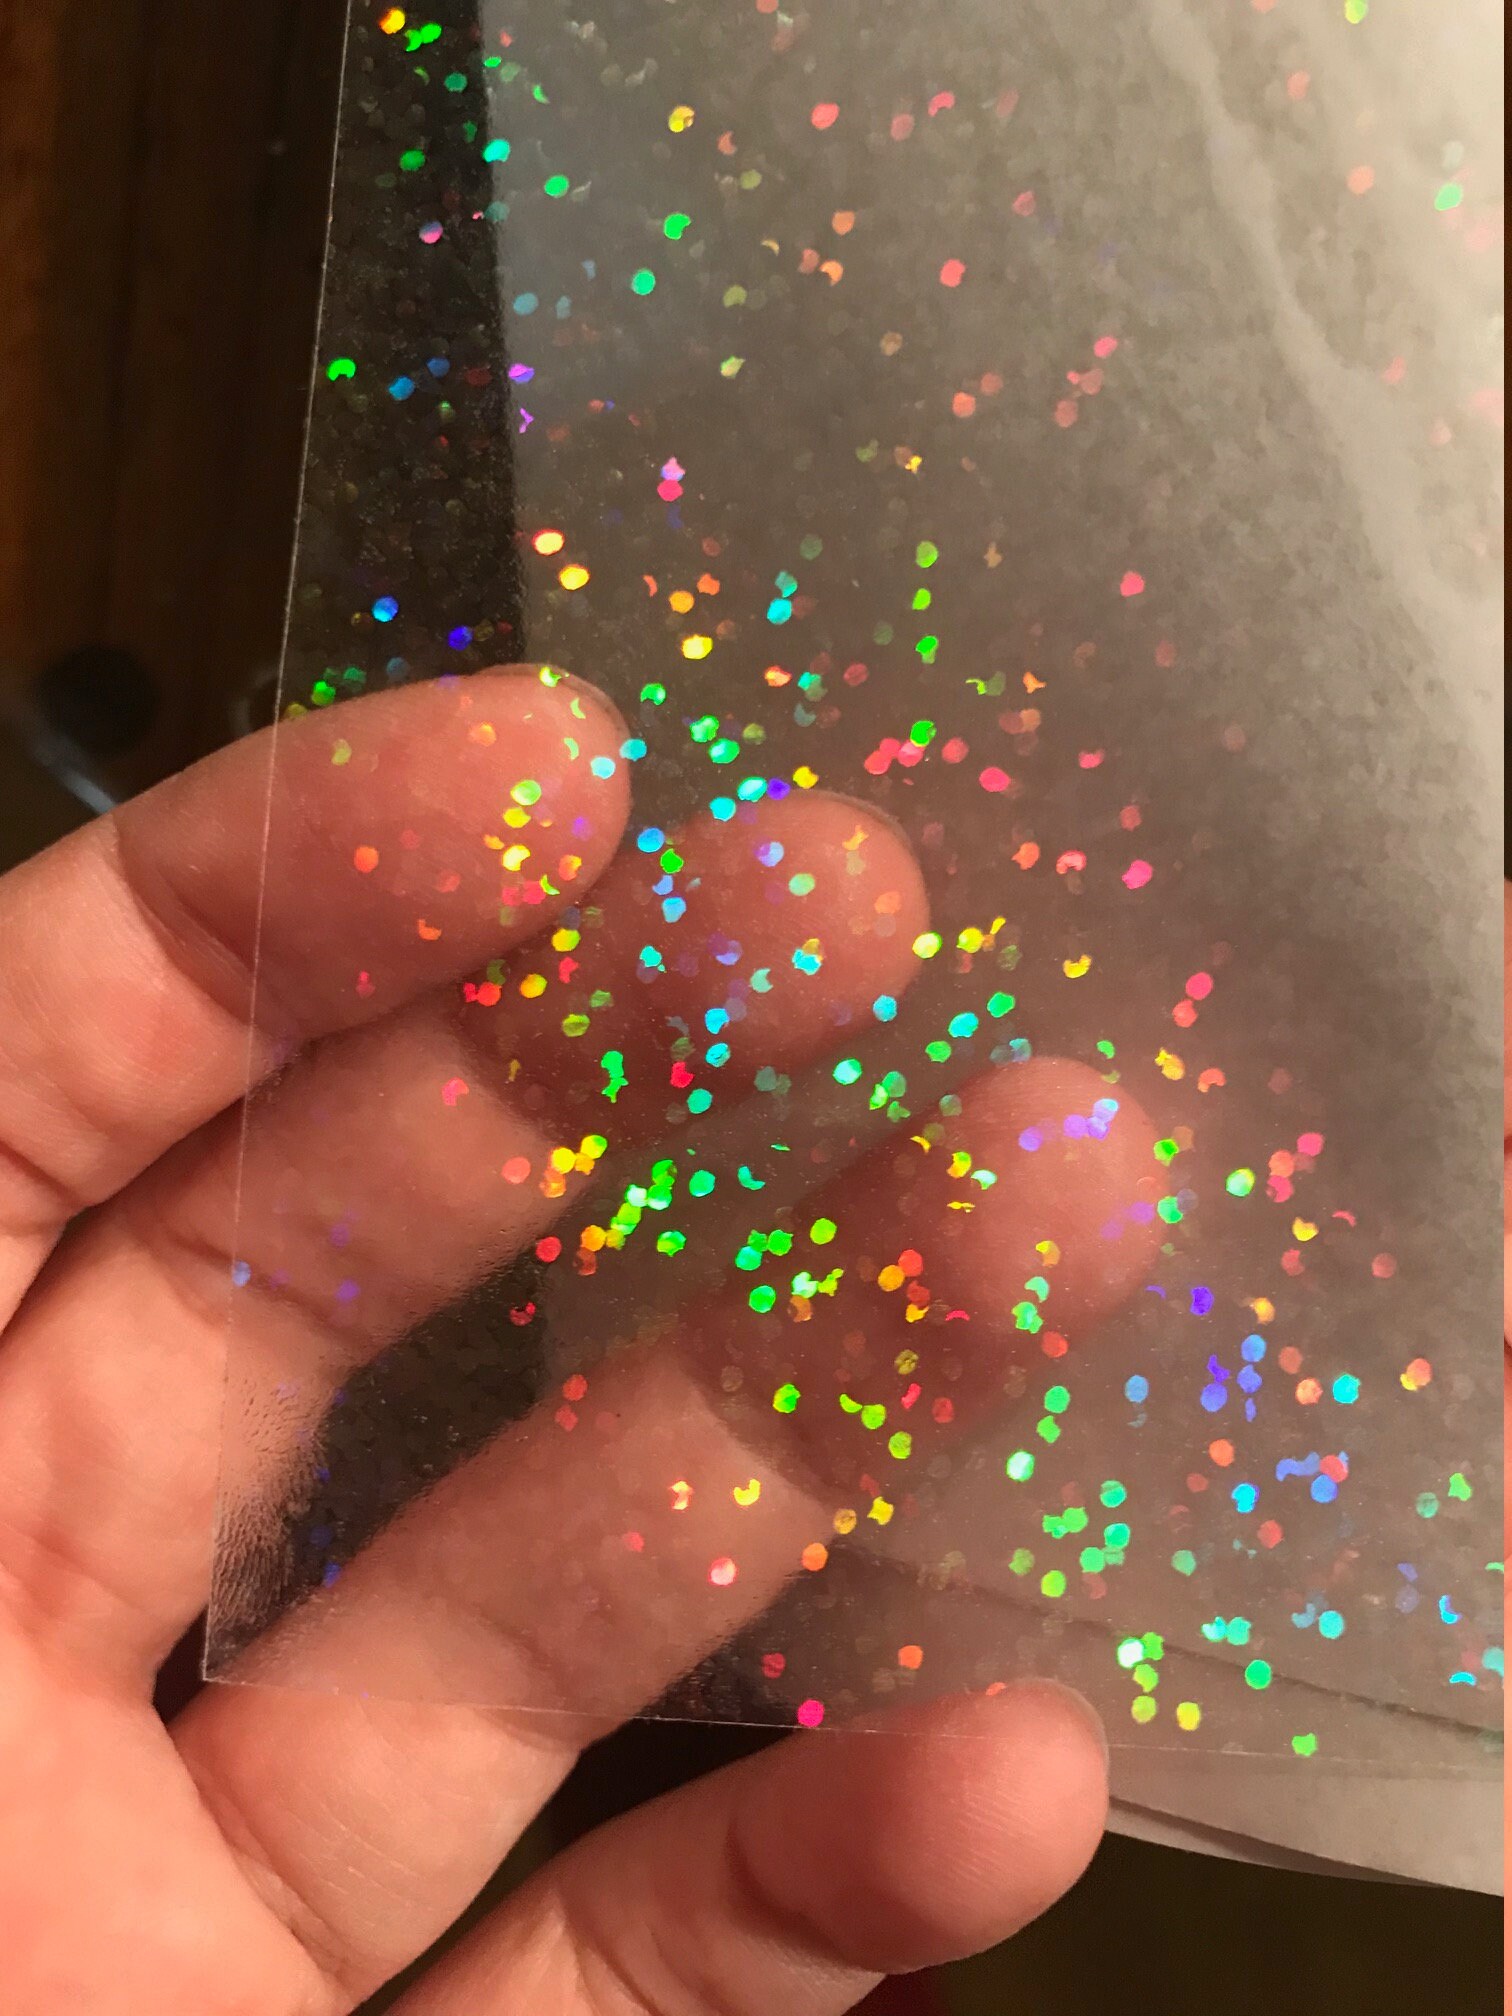 Cracked Glass Holographic Transparent Self Adhesive Film Large Sheet  Different Sizes Available for Scrapbooking Buttons Prints 